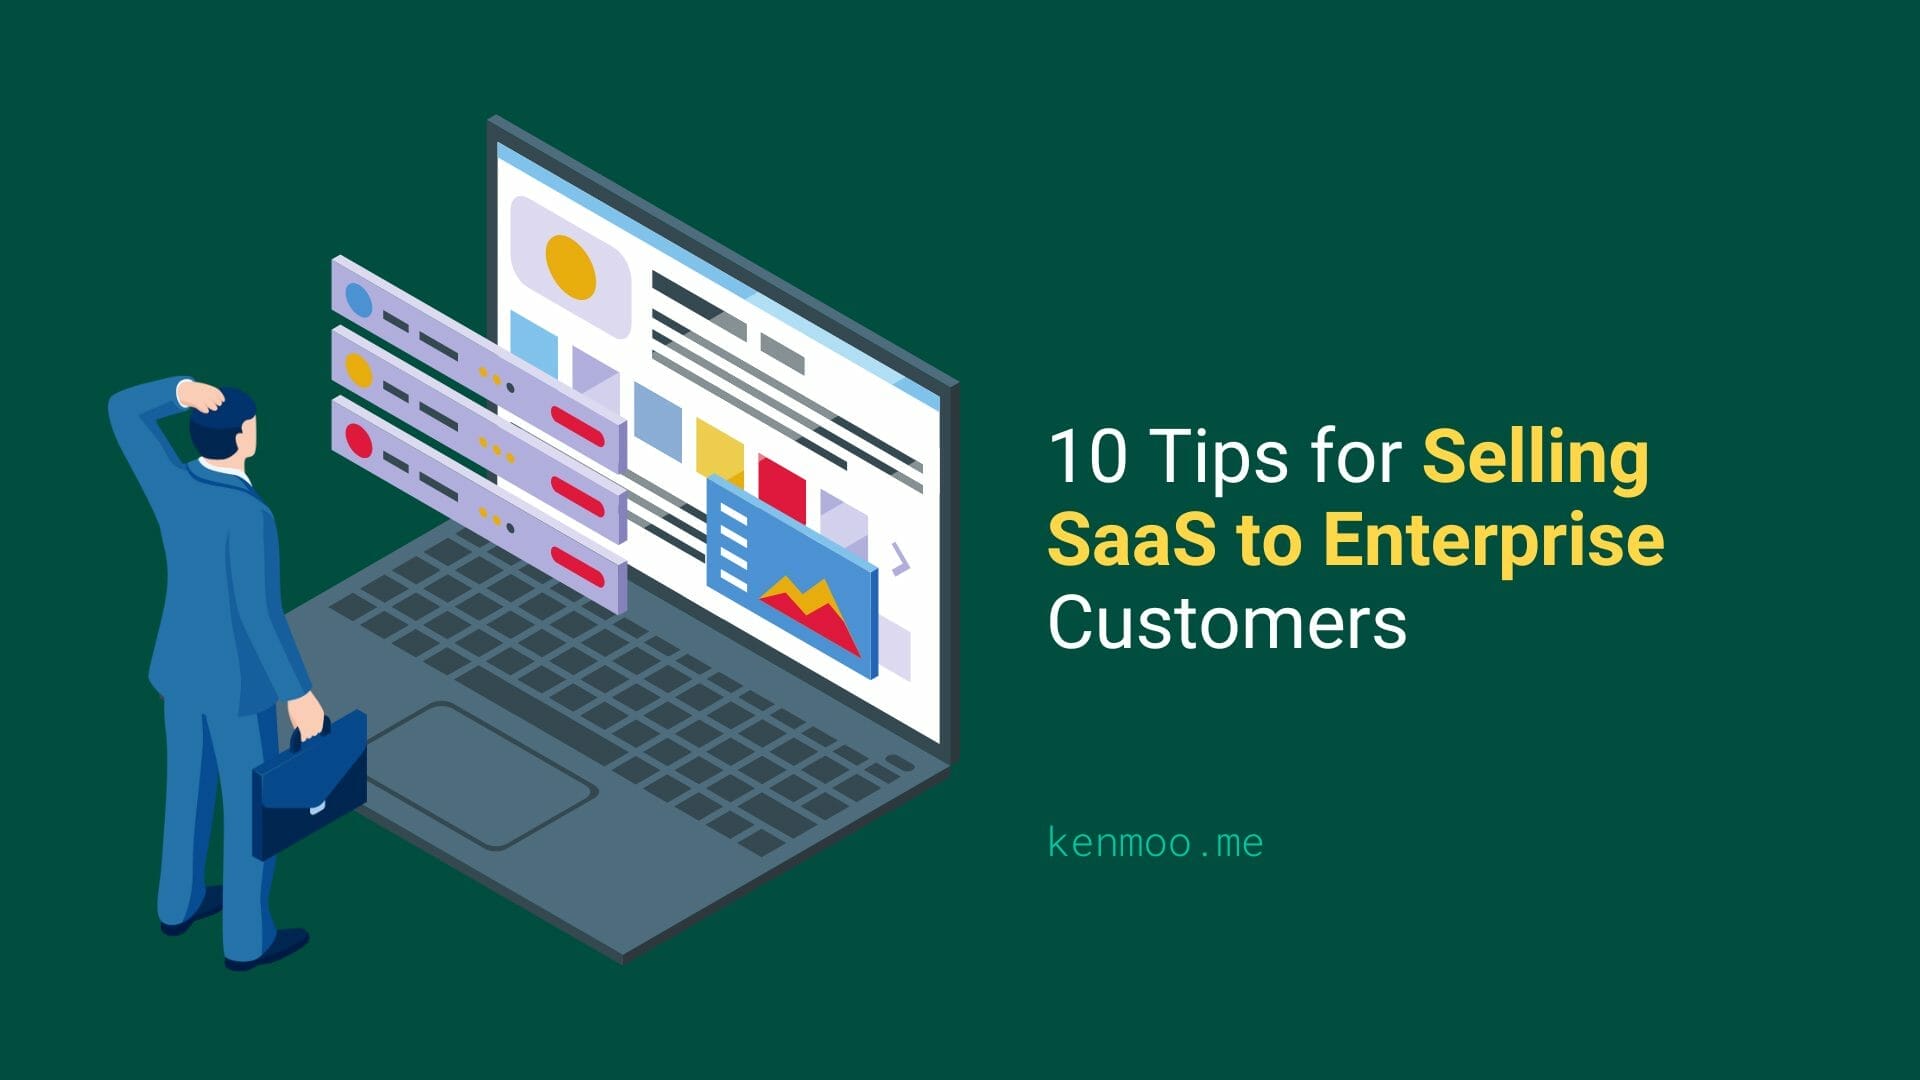 10 Tips for Selling SaaS to Enterprise Customers